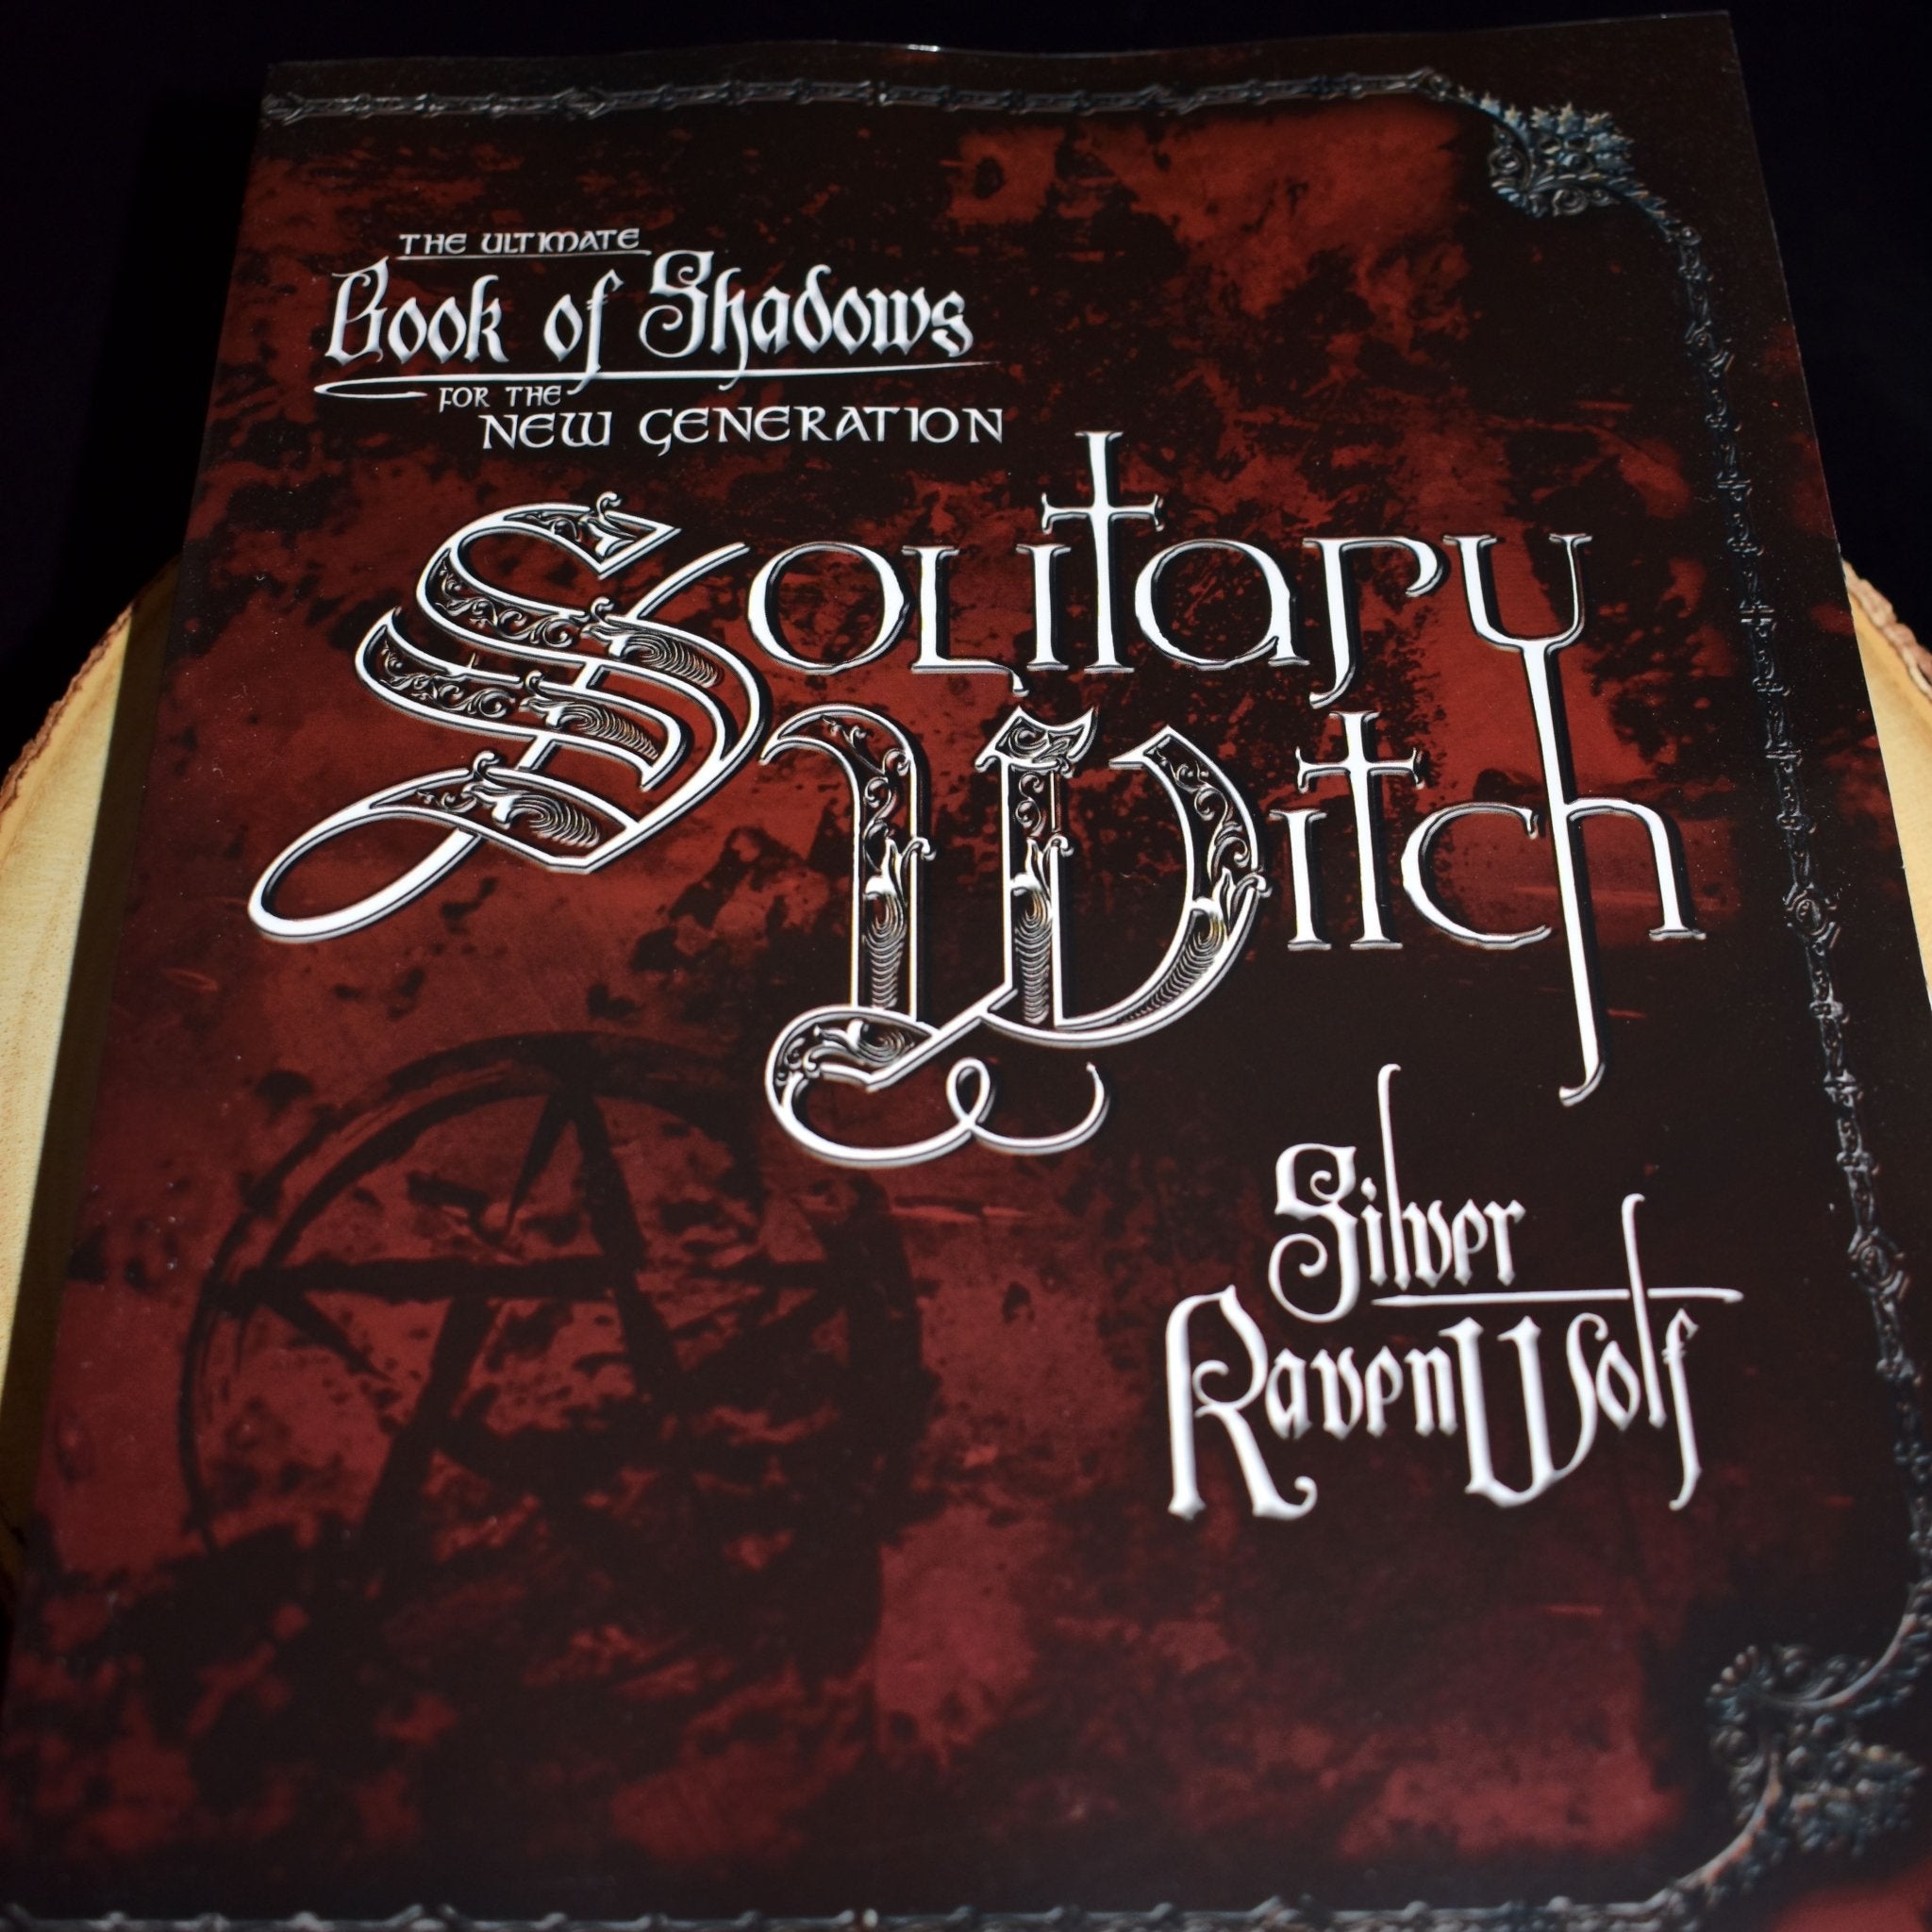 Solitary Witch: The Ultimate Book of Shadows for The New Generation by Silver Ravenwolf